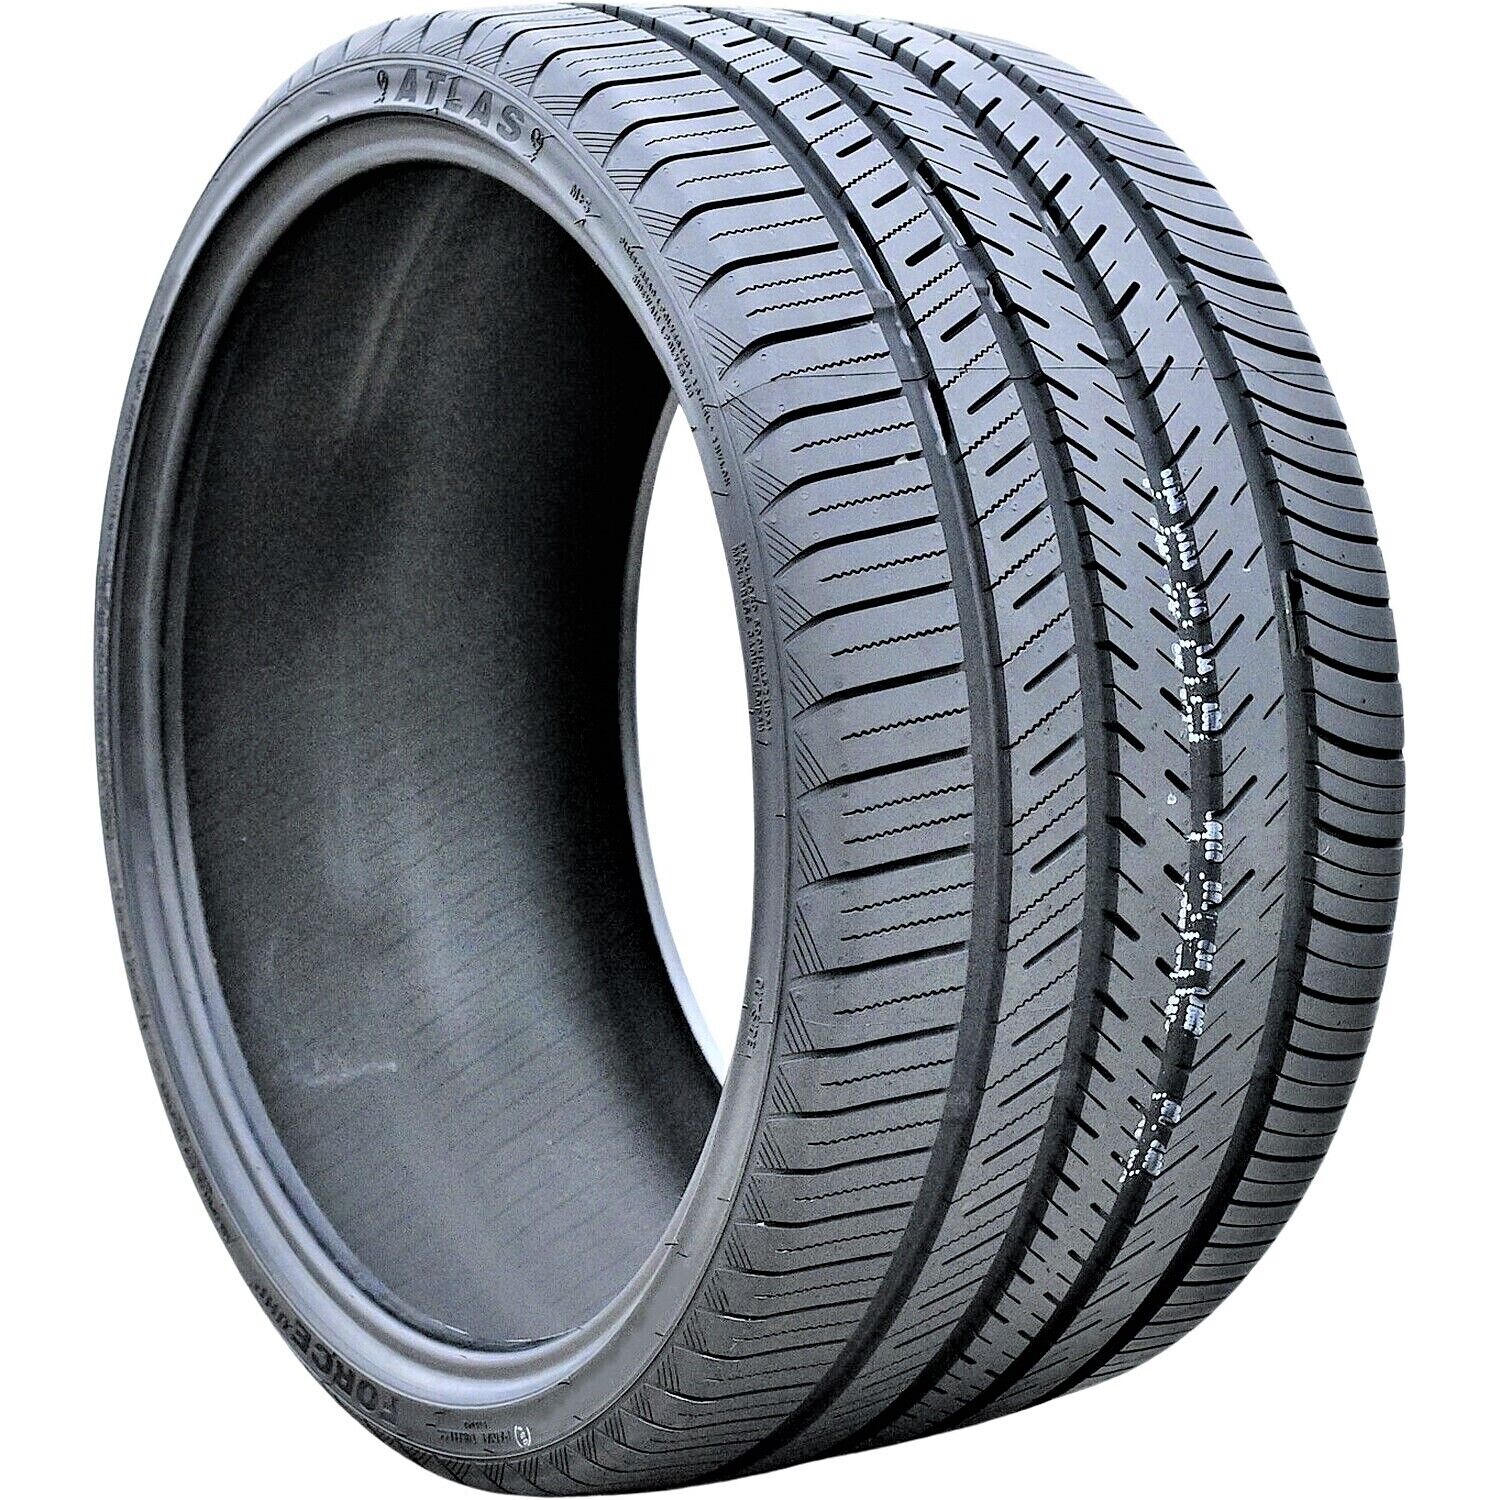 Tire Atlas Force UHP 275/25R28 99W XL A/S Performance